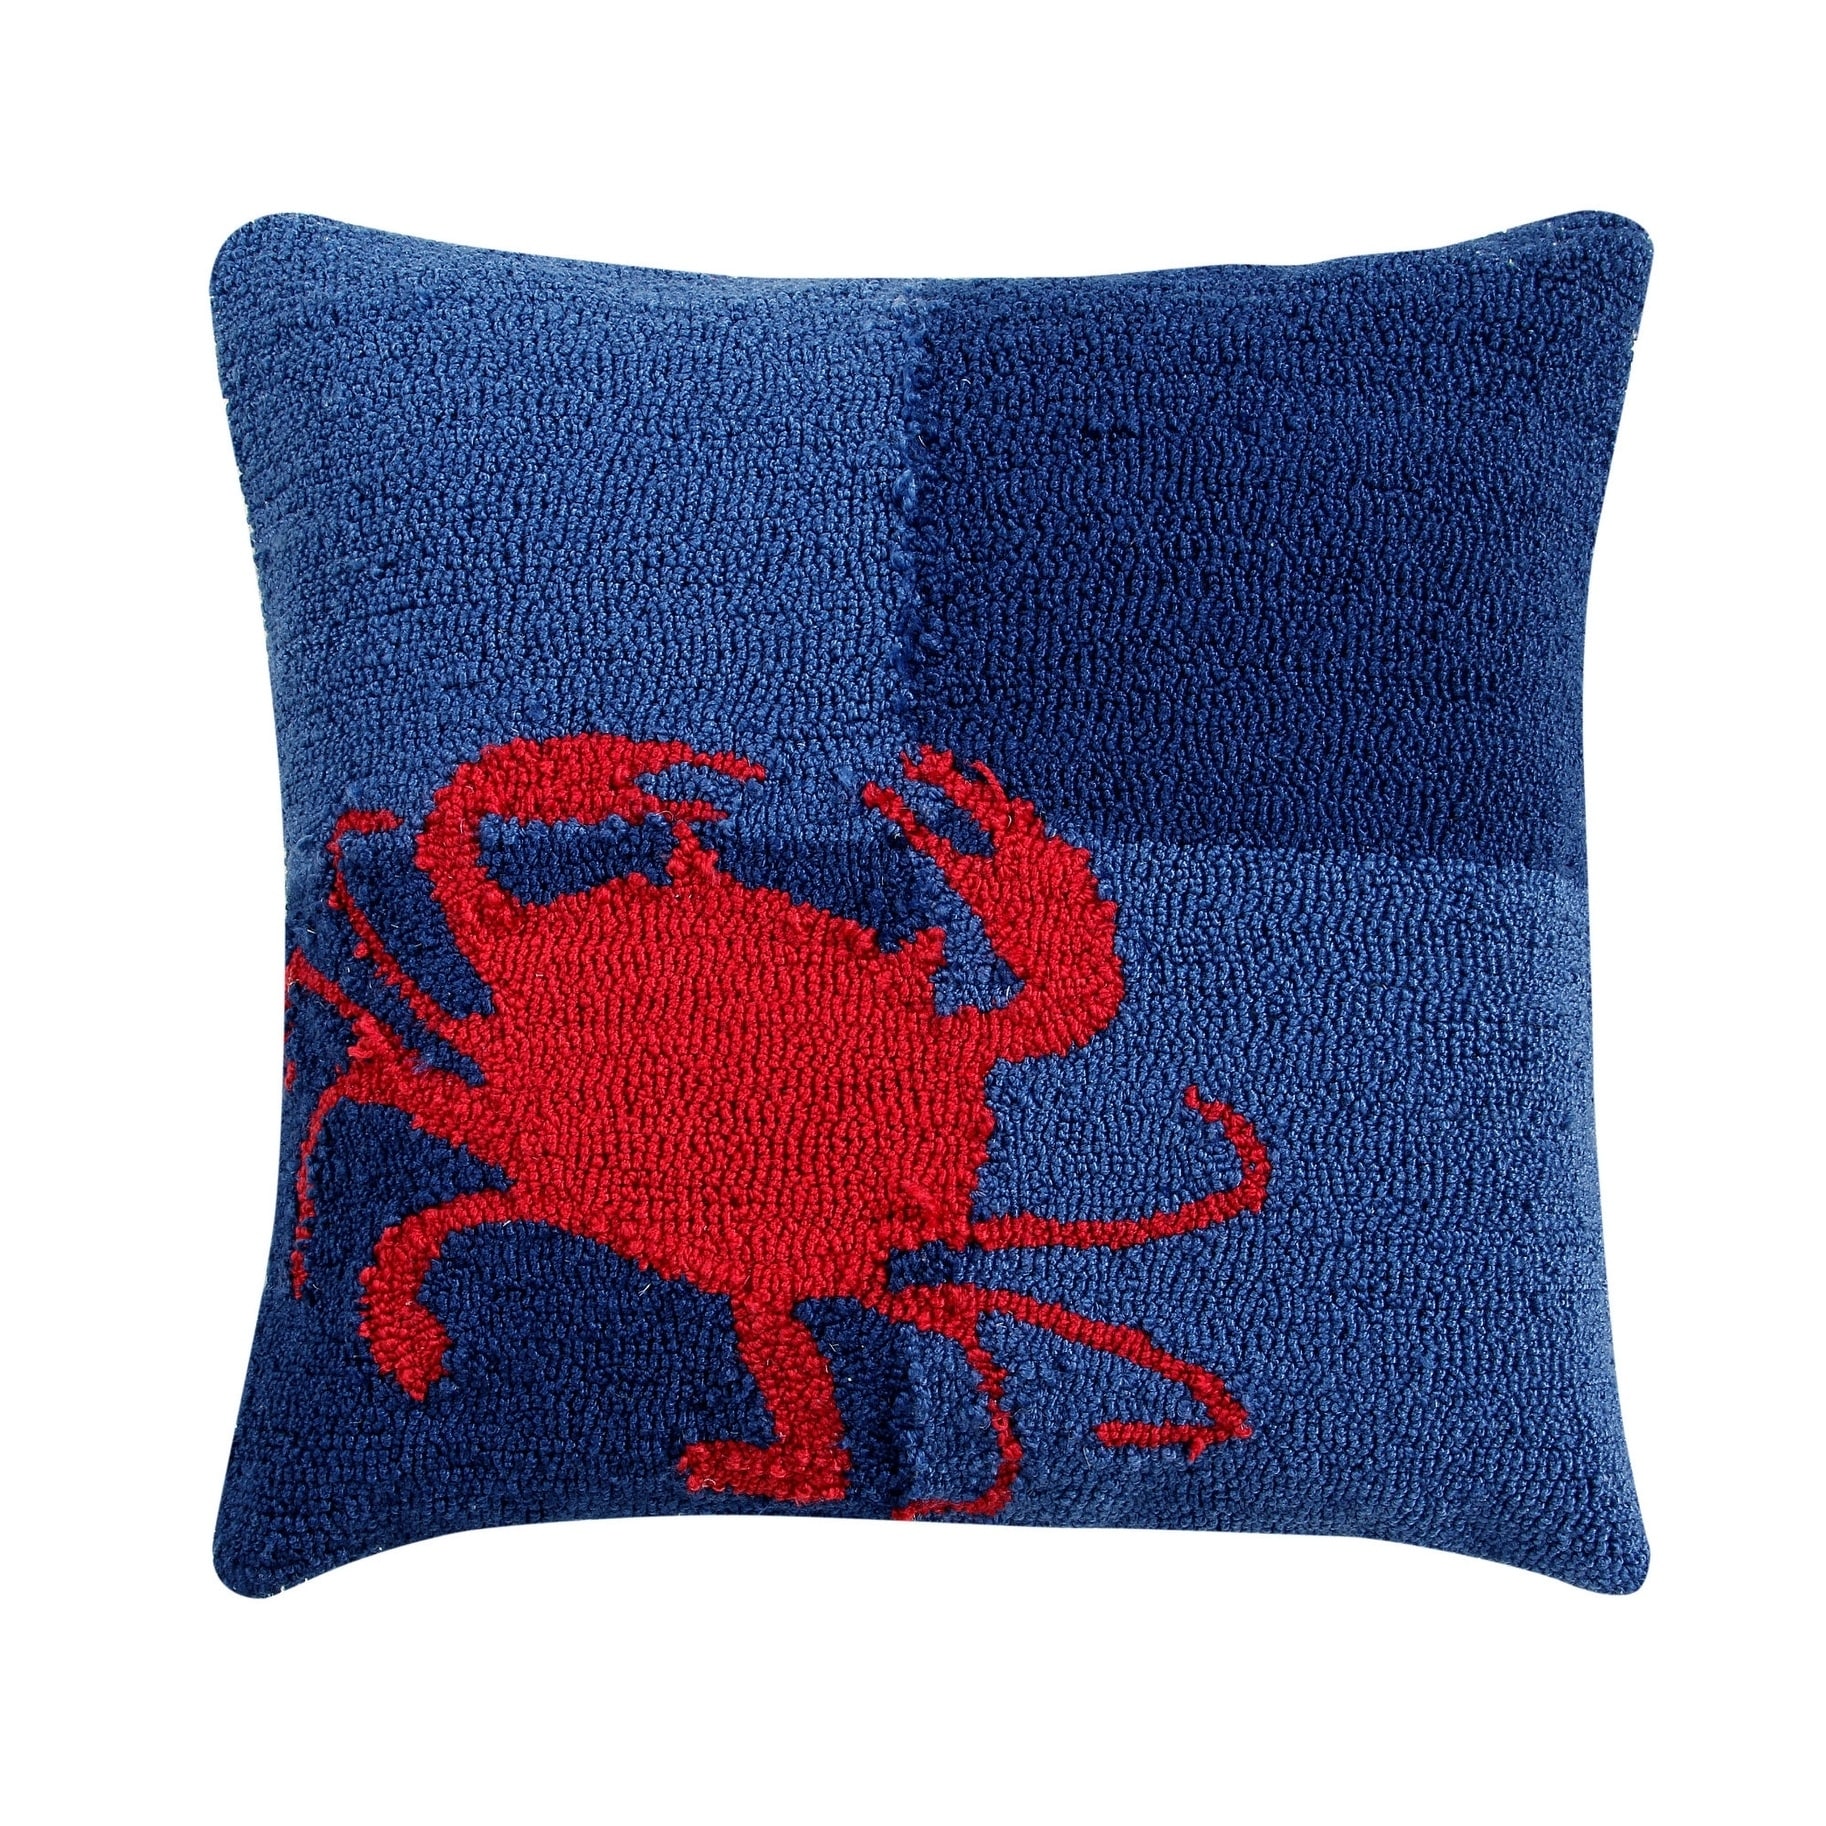 Crab 18 Square Hand-Hooked Cushion